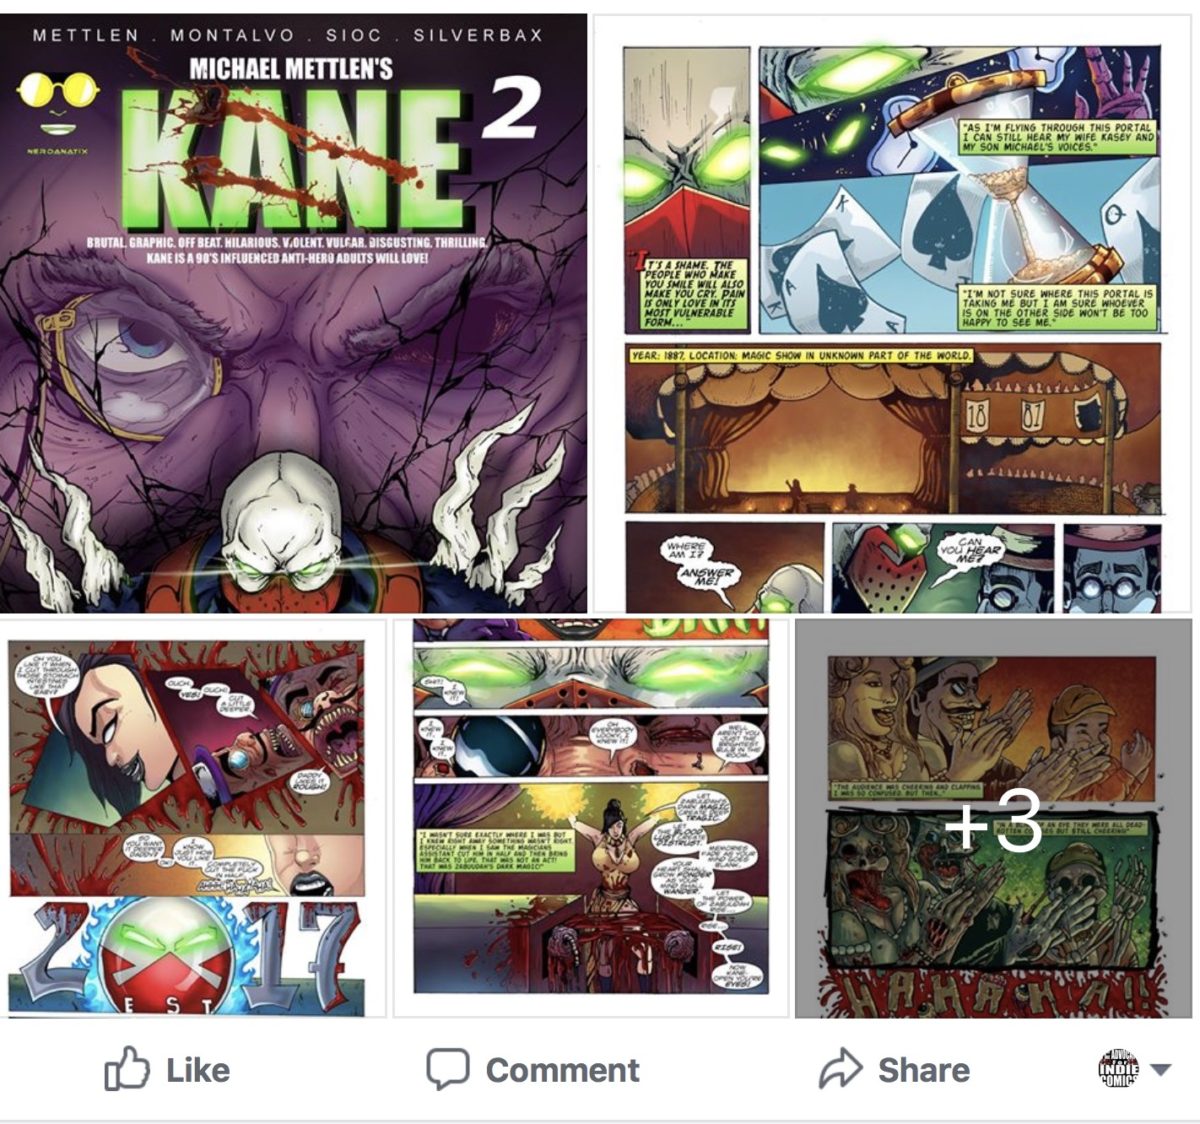 KANE #2 #PRINT AVAILABLE NOW! $3 + only $3.99  shipping